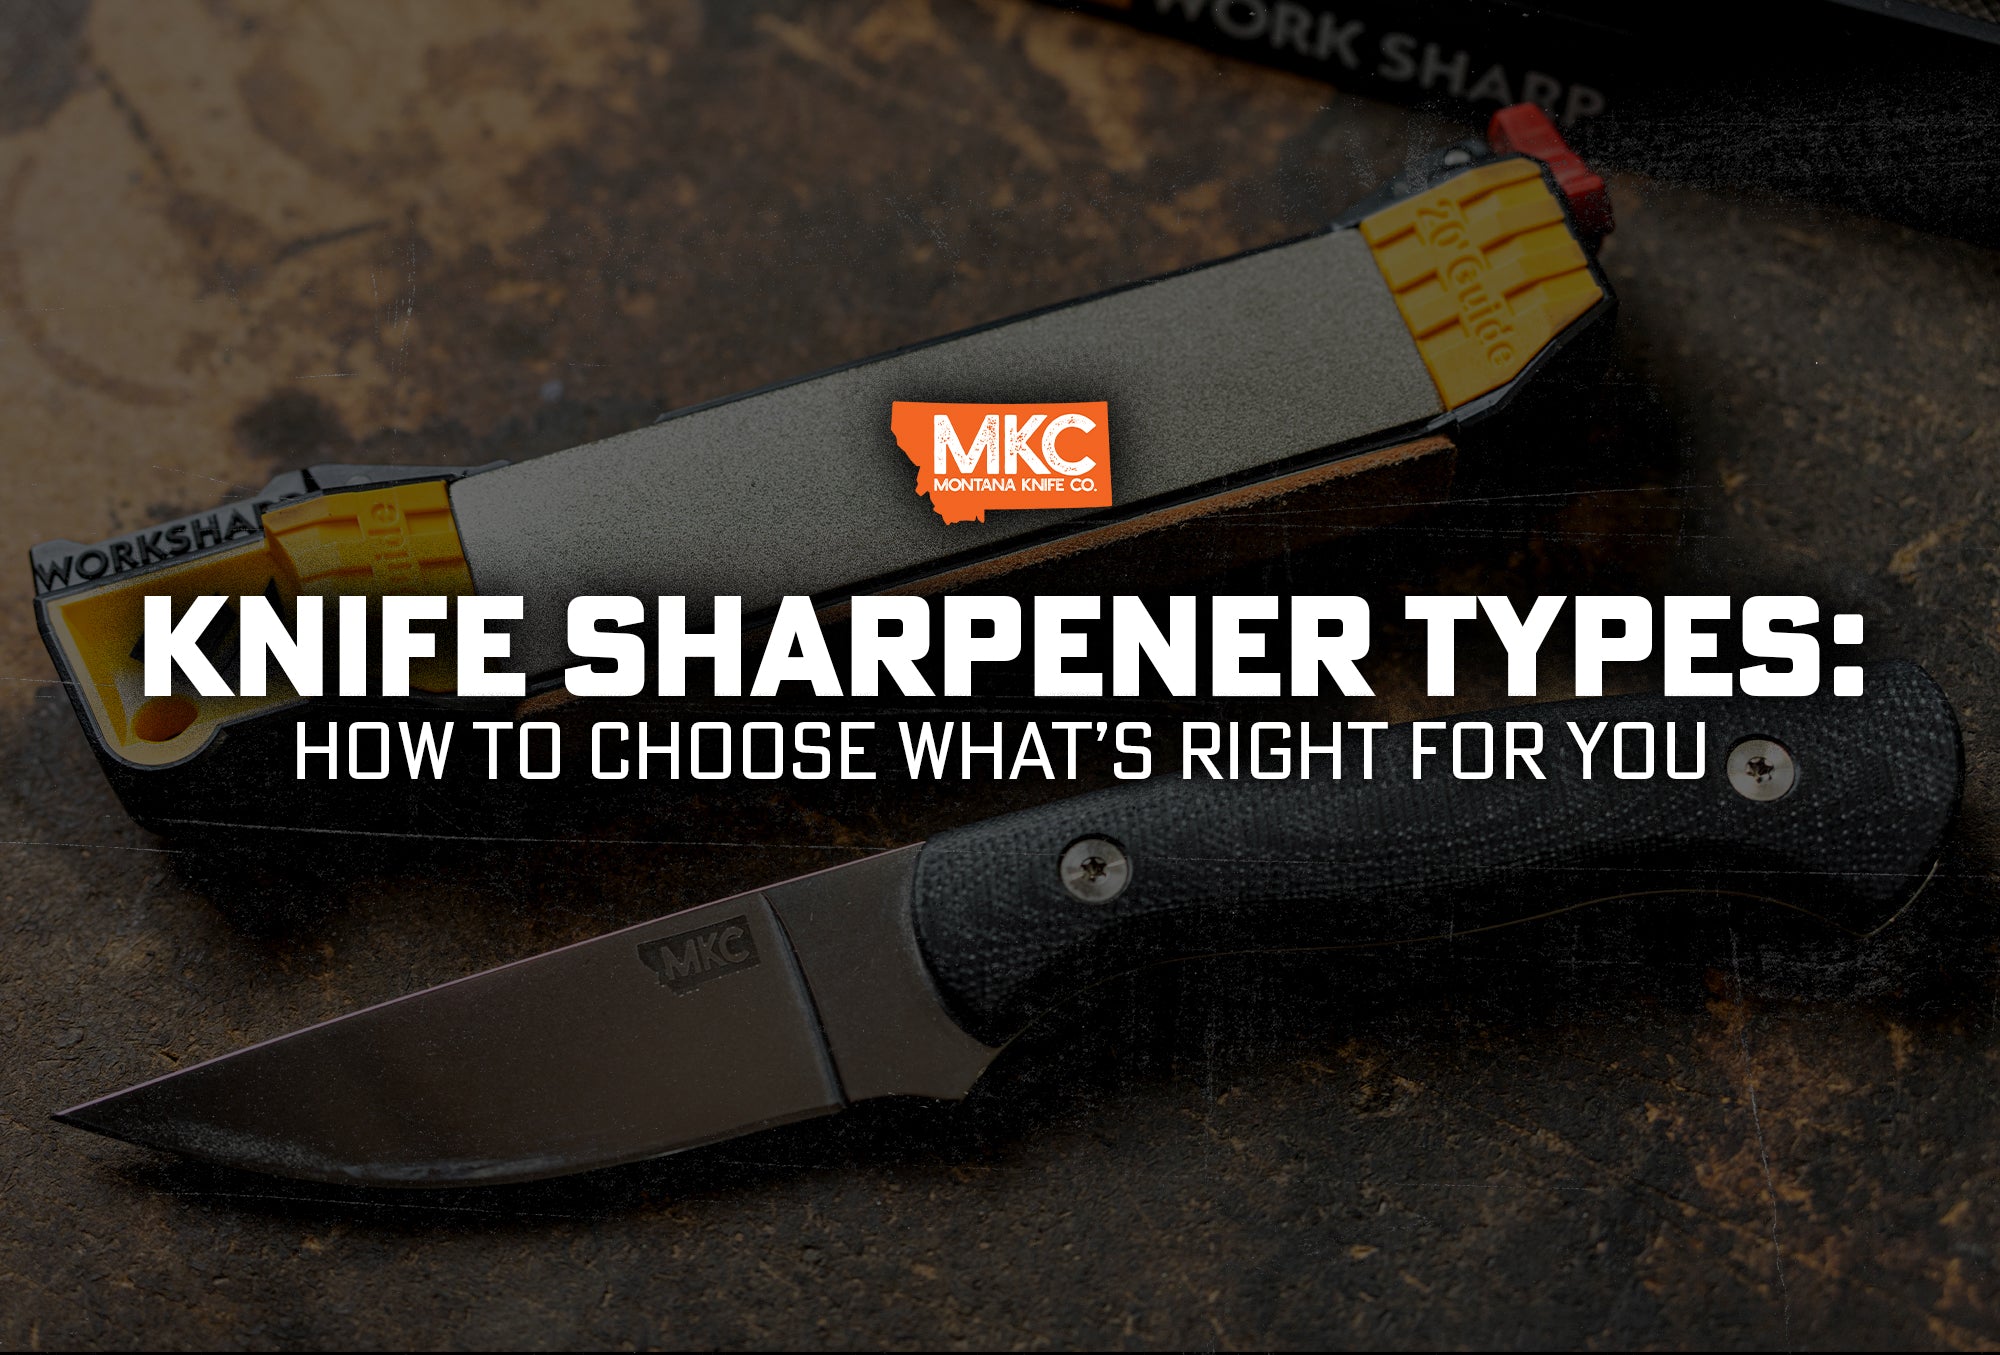 A hunting knife next to a knife sharpener on a table.